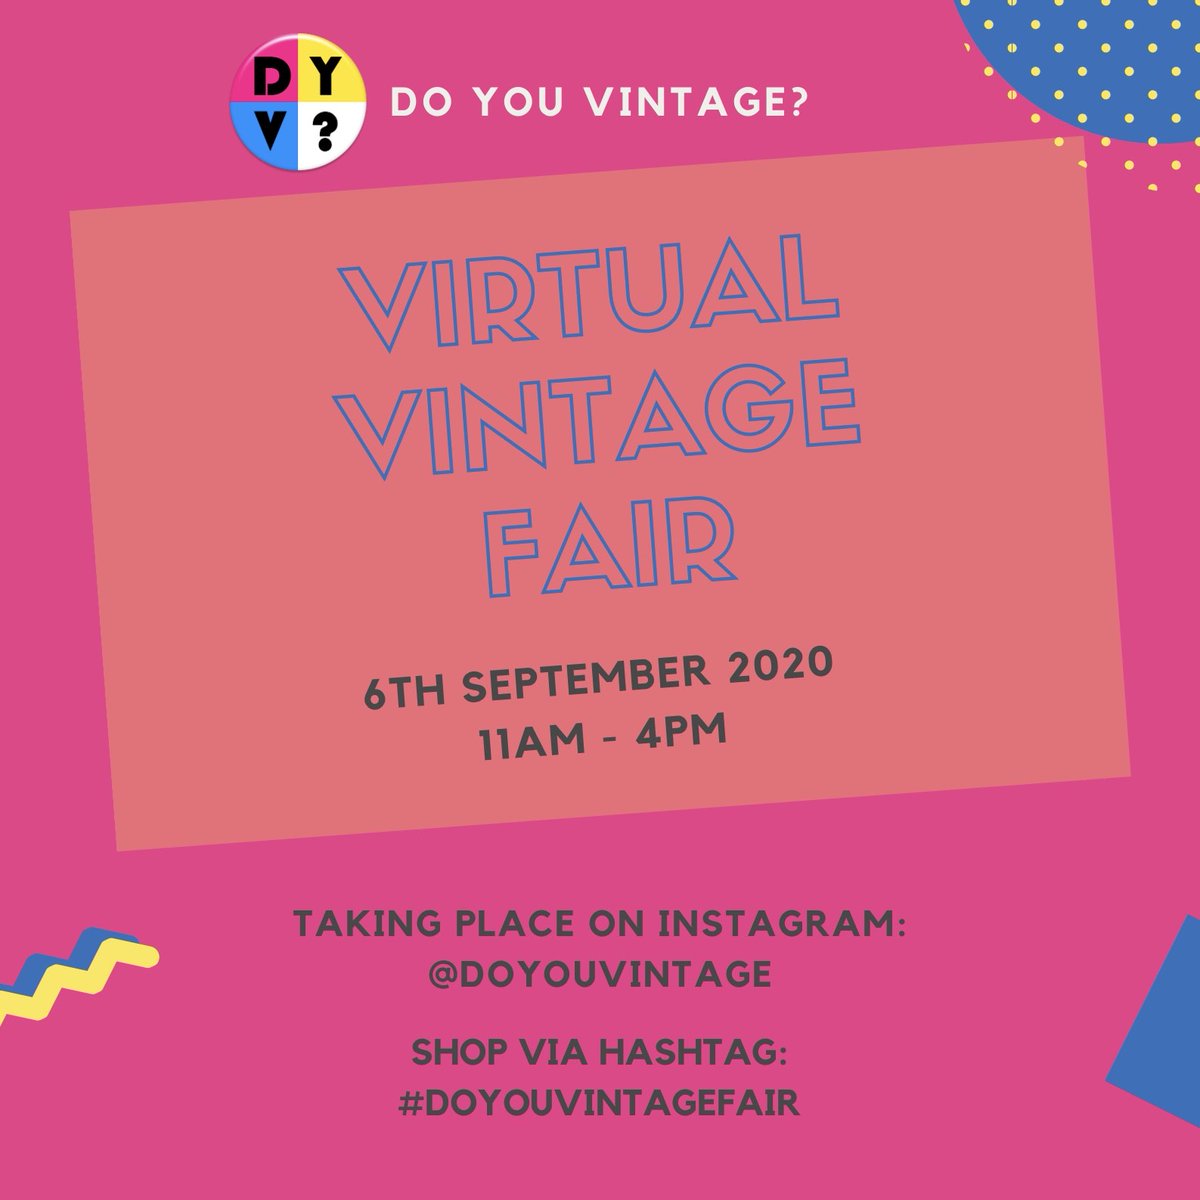 TODAY from 11-4pm is our virtual vintage fair on Instagram Stories. #2ndhandseptember #vintage #sustainablebusiness #sustainablefashion #retro #vintagestyle #midcentury #antiques #collectables #vintageclothing #ukgifthour #ukgiftam